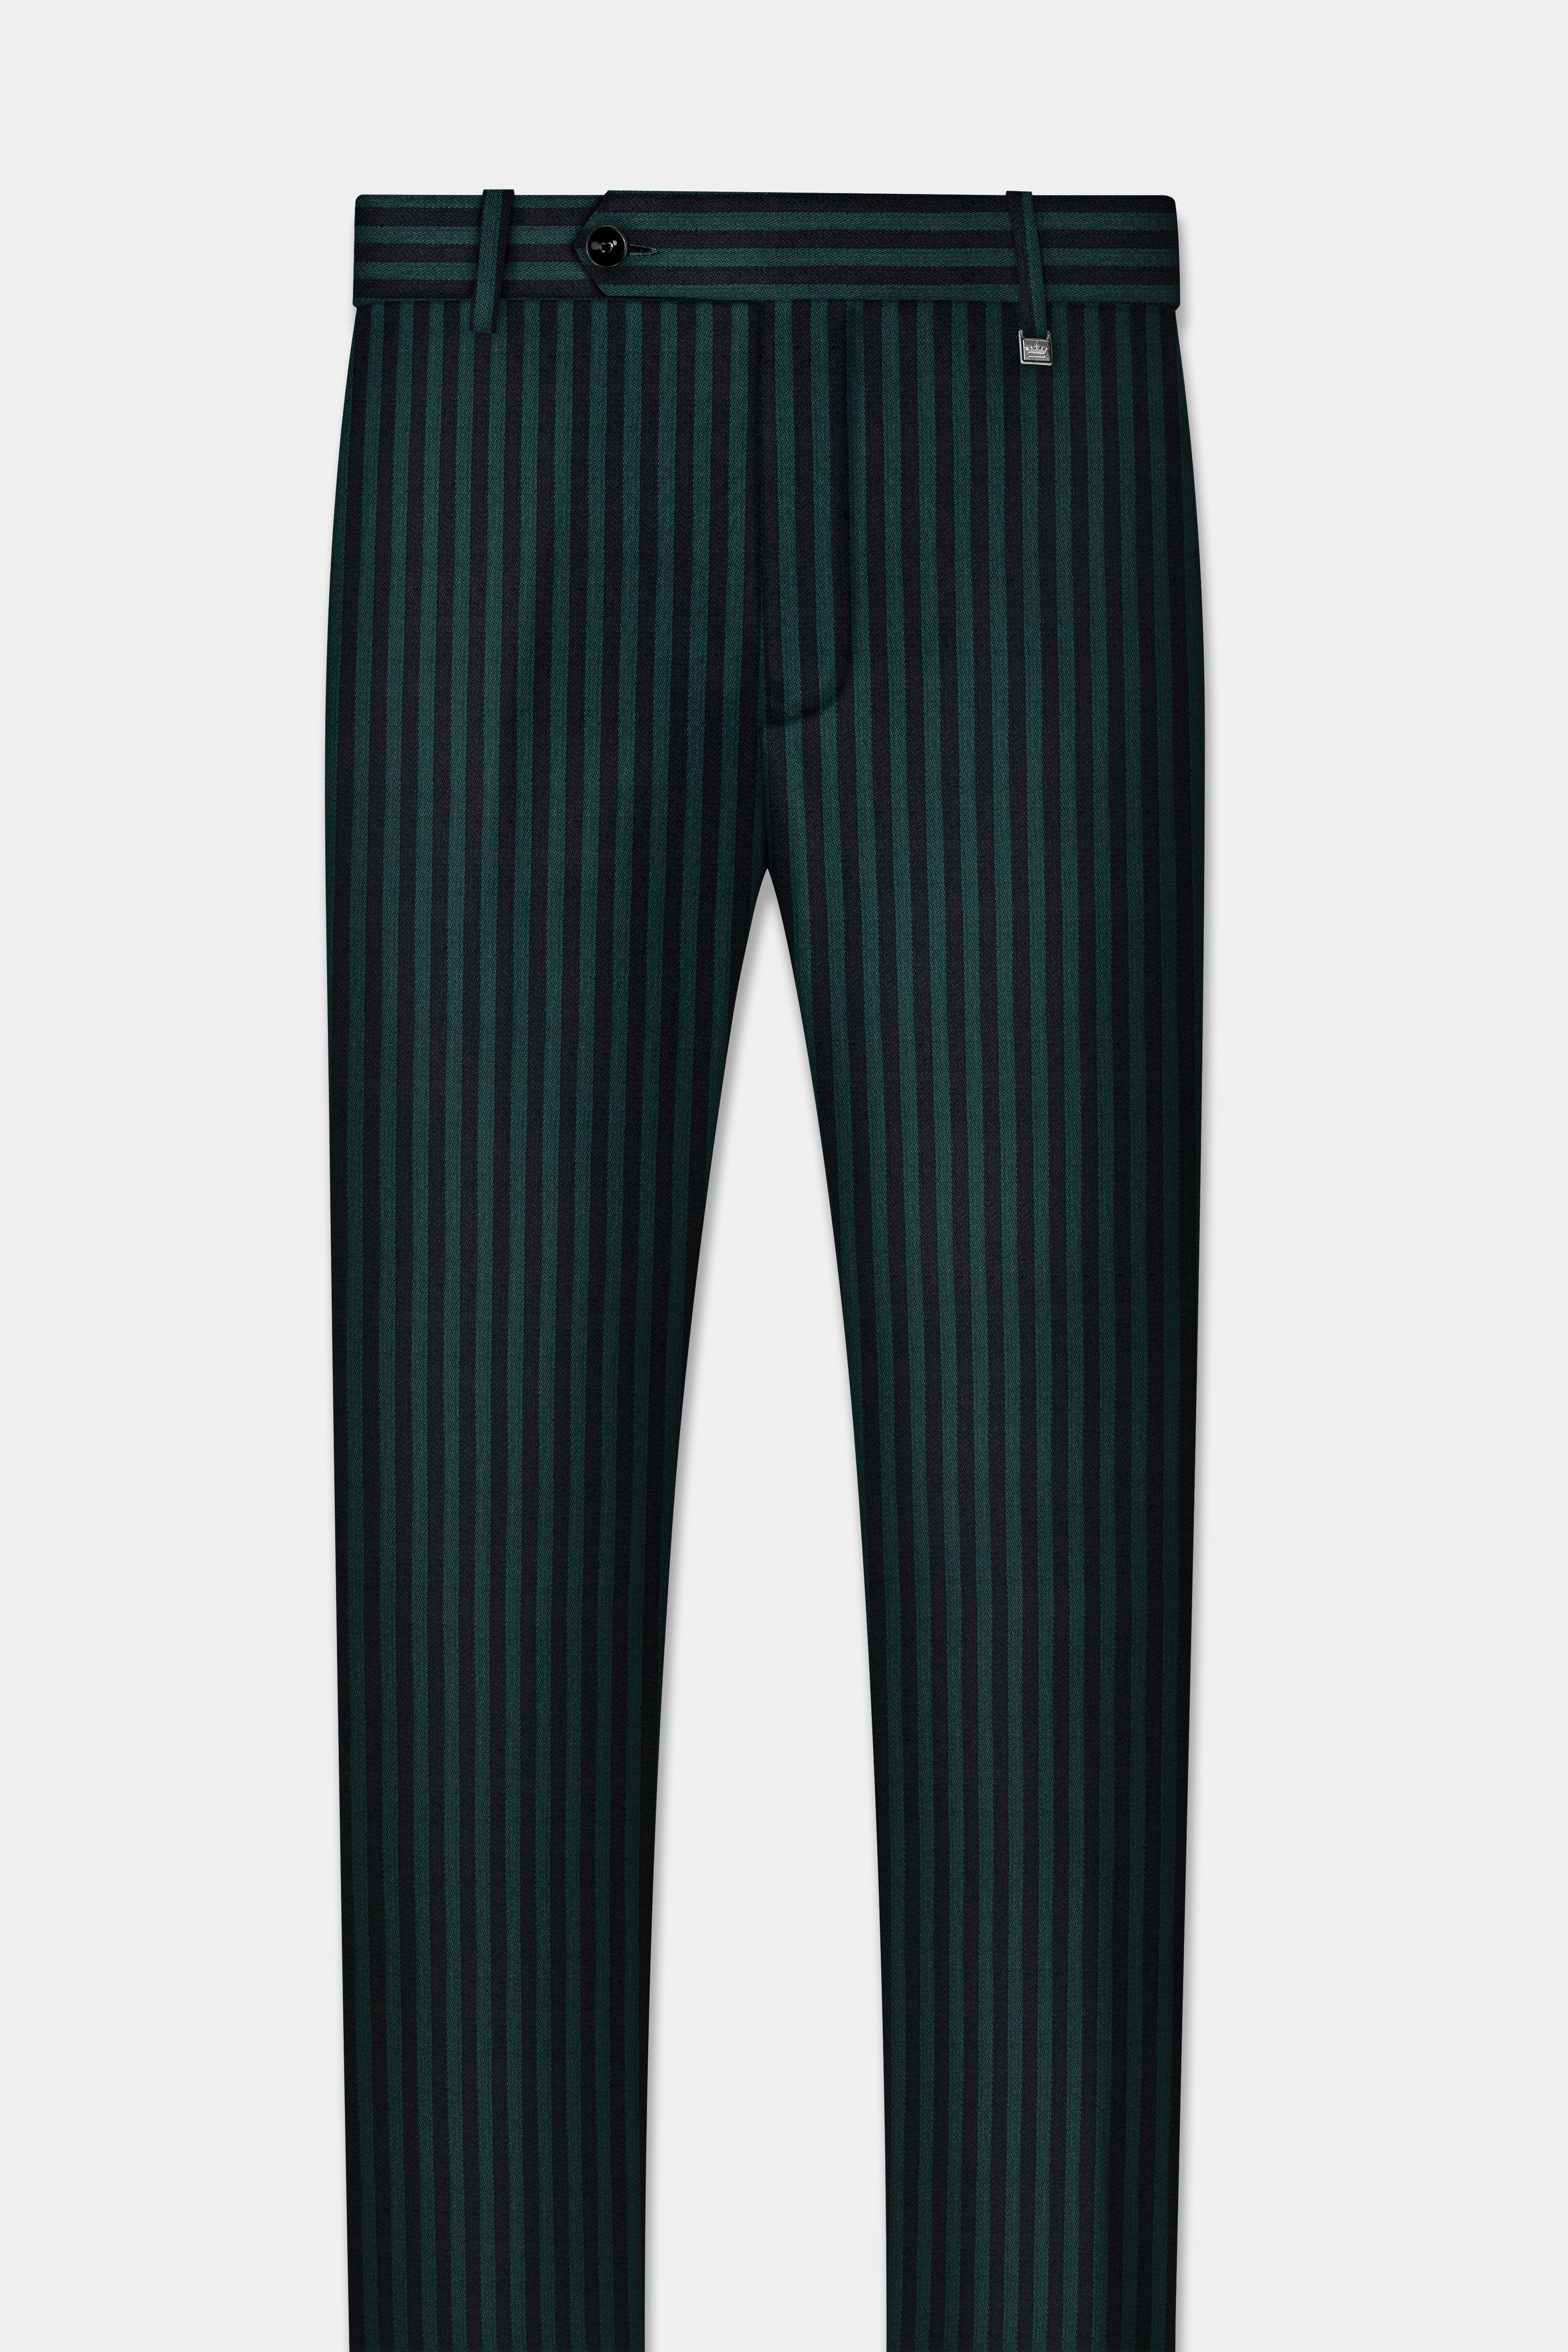 Celtic Green with Black Striped Wool Blend Suit